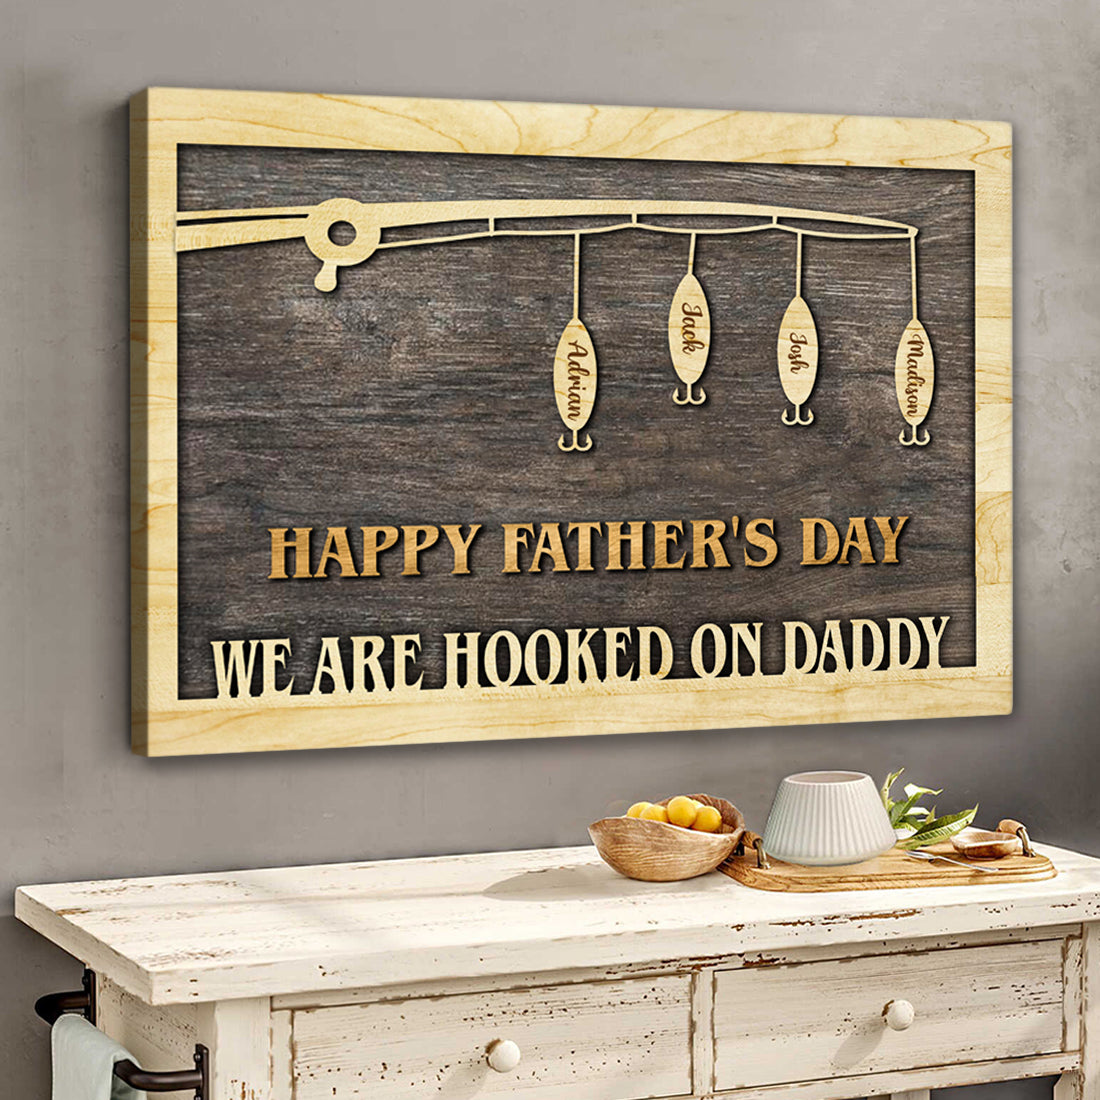 WE ARE HOOKED ON GRANDPA/DADDY - Personalized Canvas AK